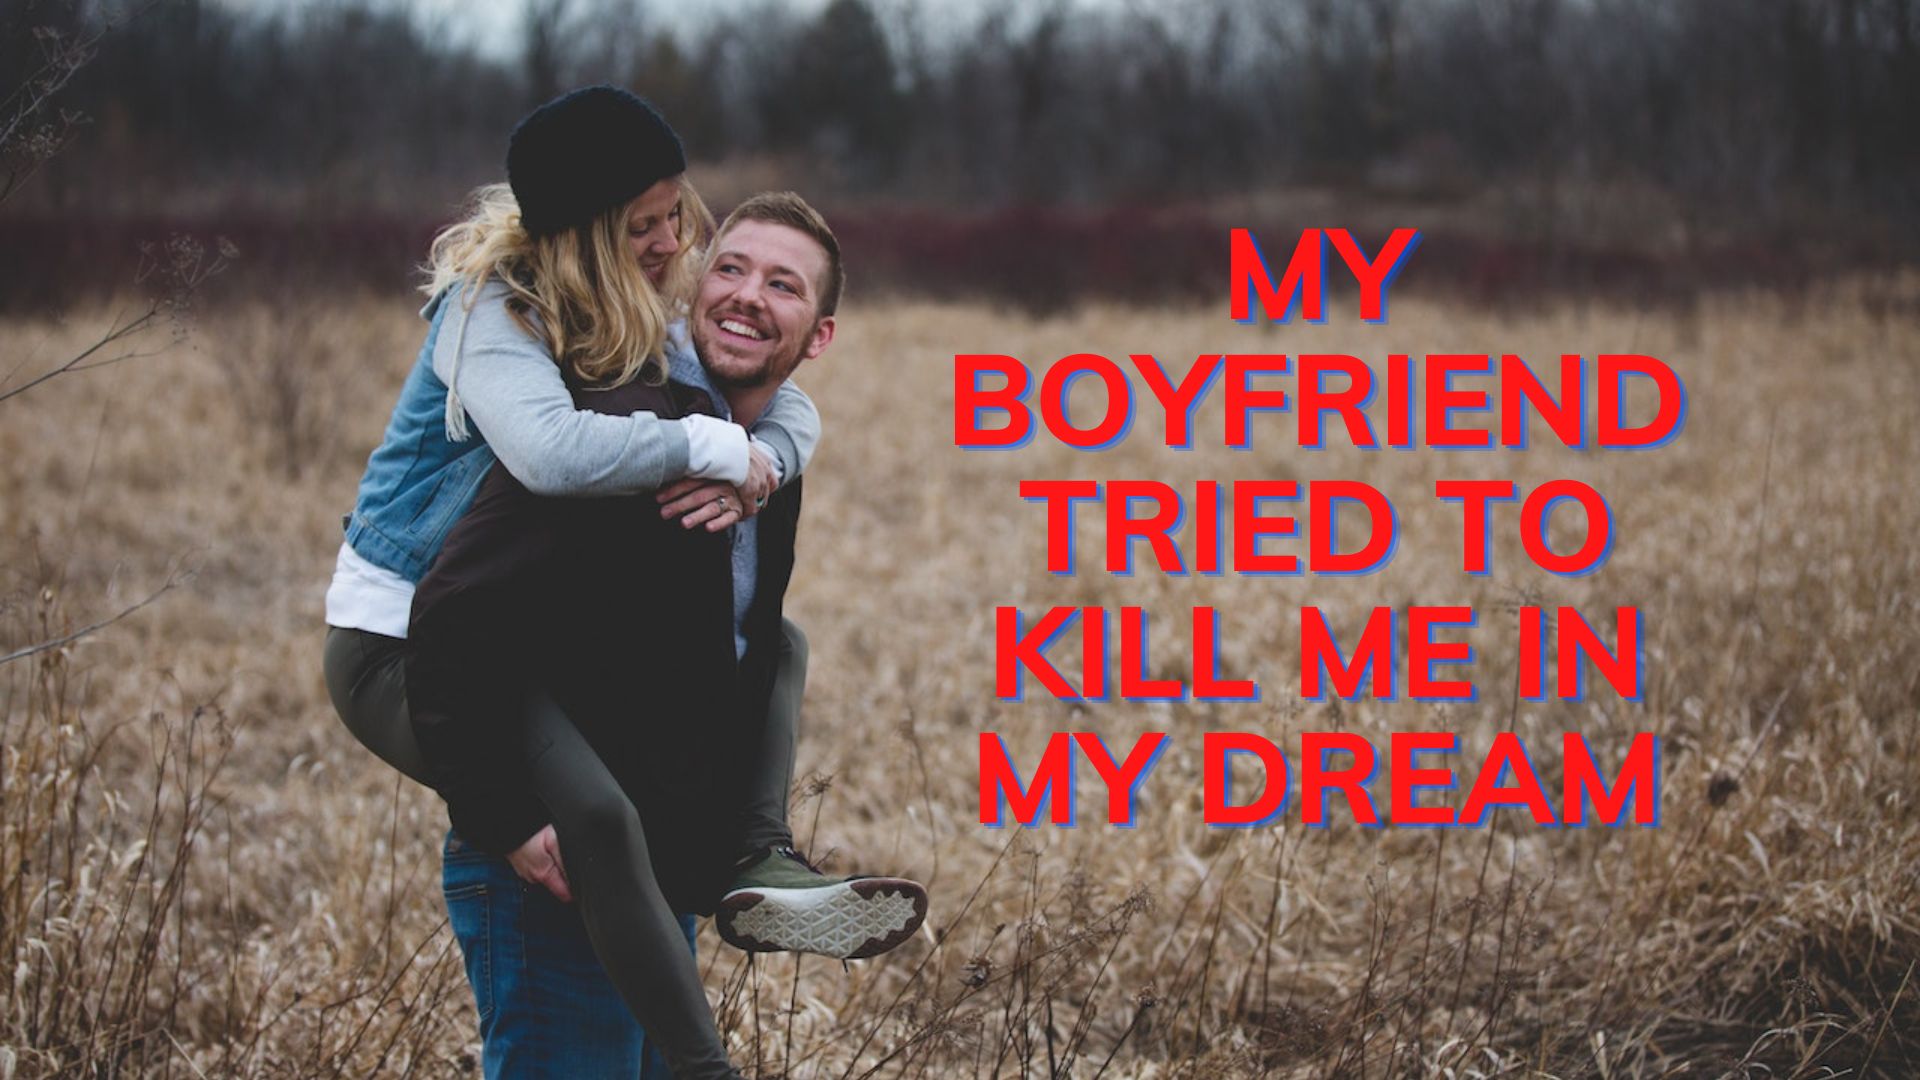 My Boyfriend Tried To Kill Me In My Dream - Linked To Feeling A Loss Of Control In Real Life